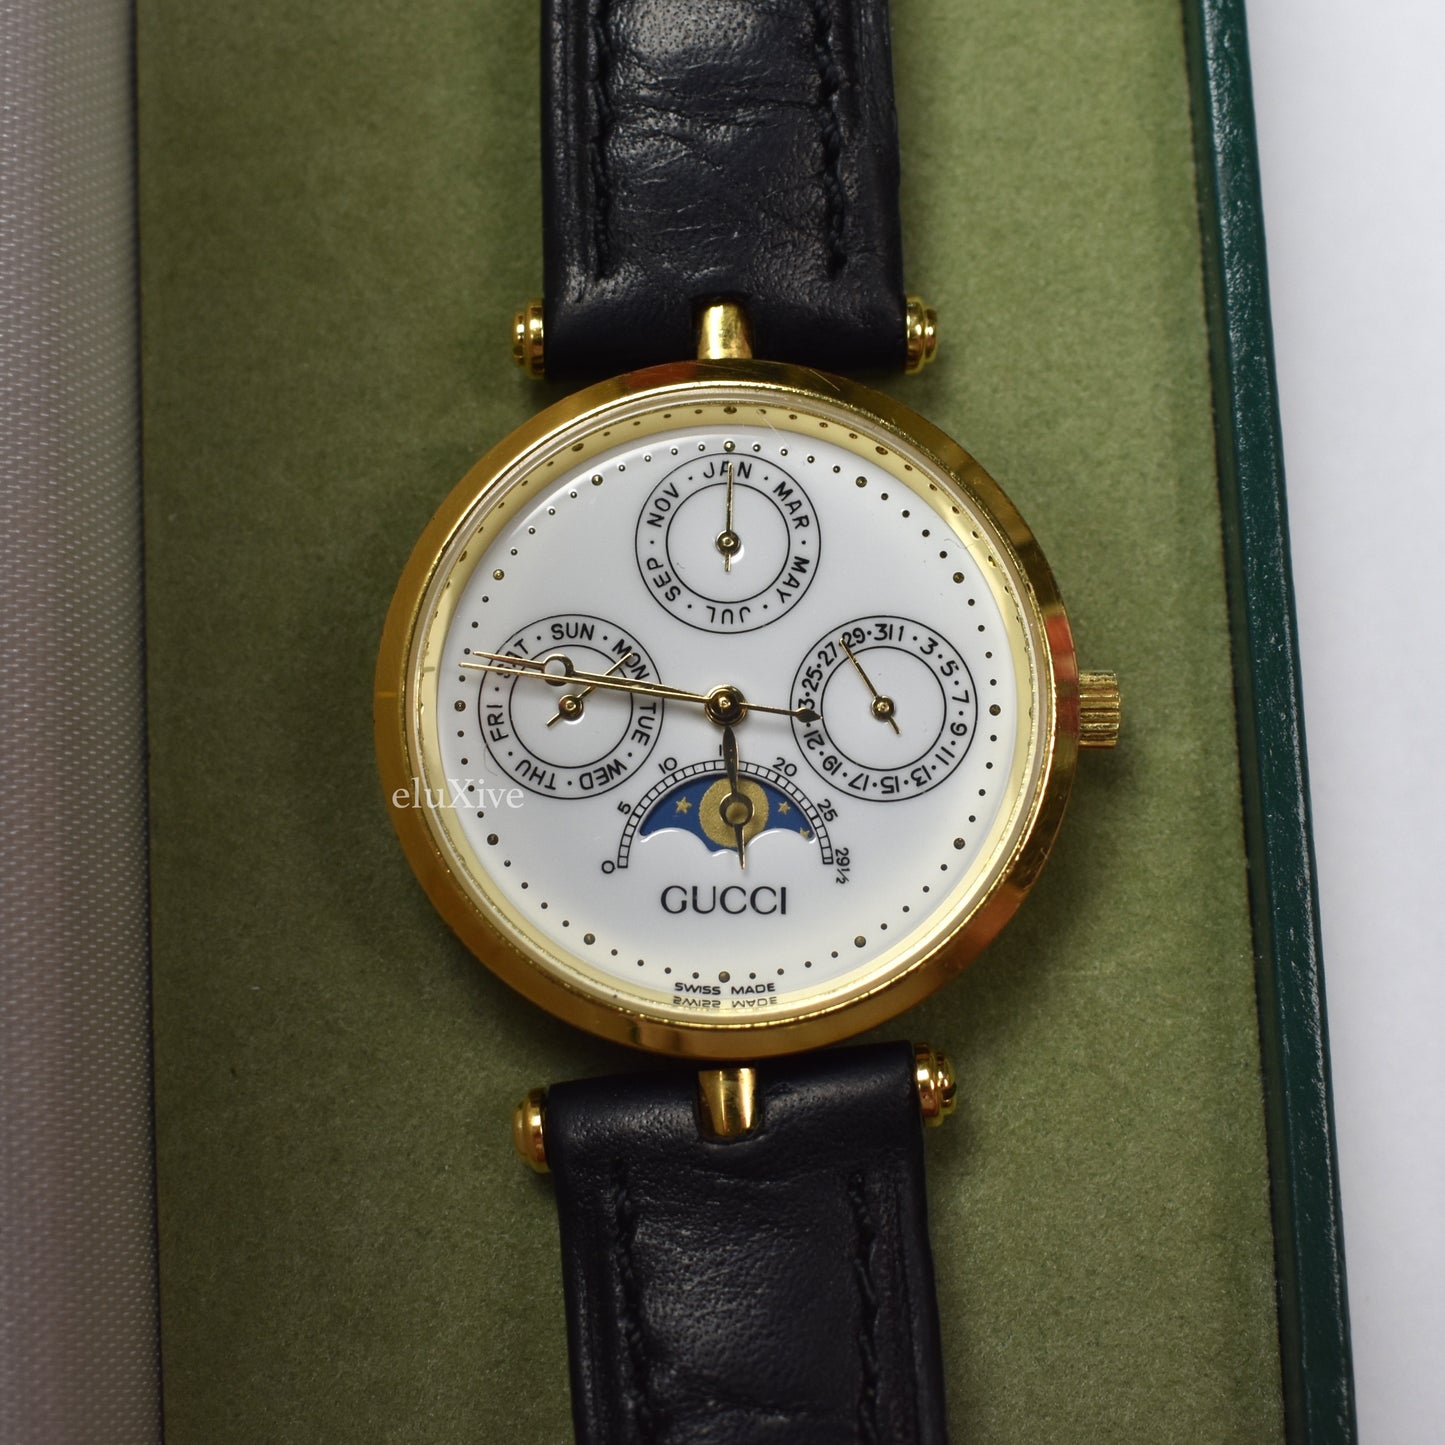 Gucci - Men's 2000M Moonphase Watch